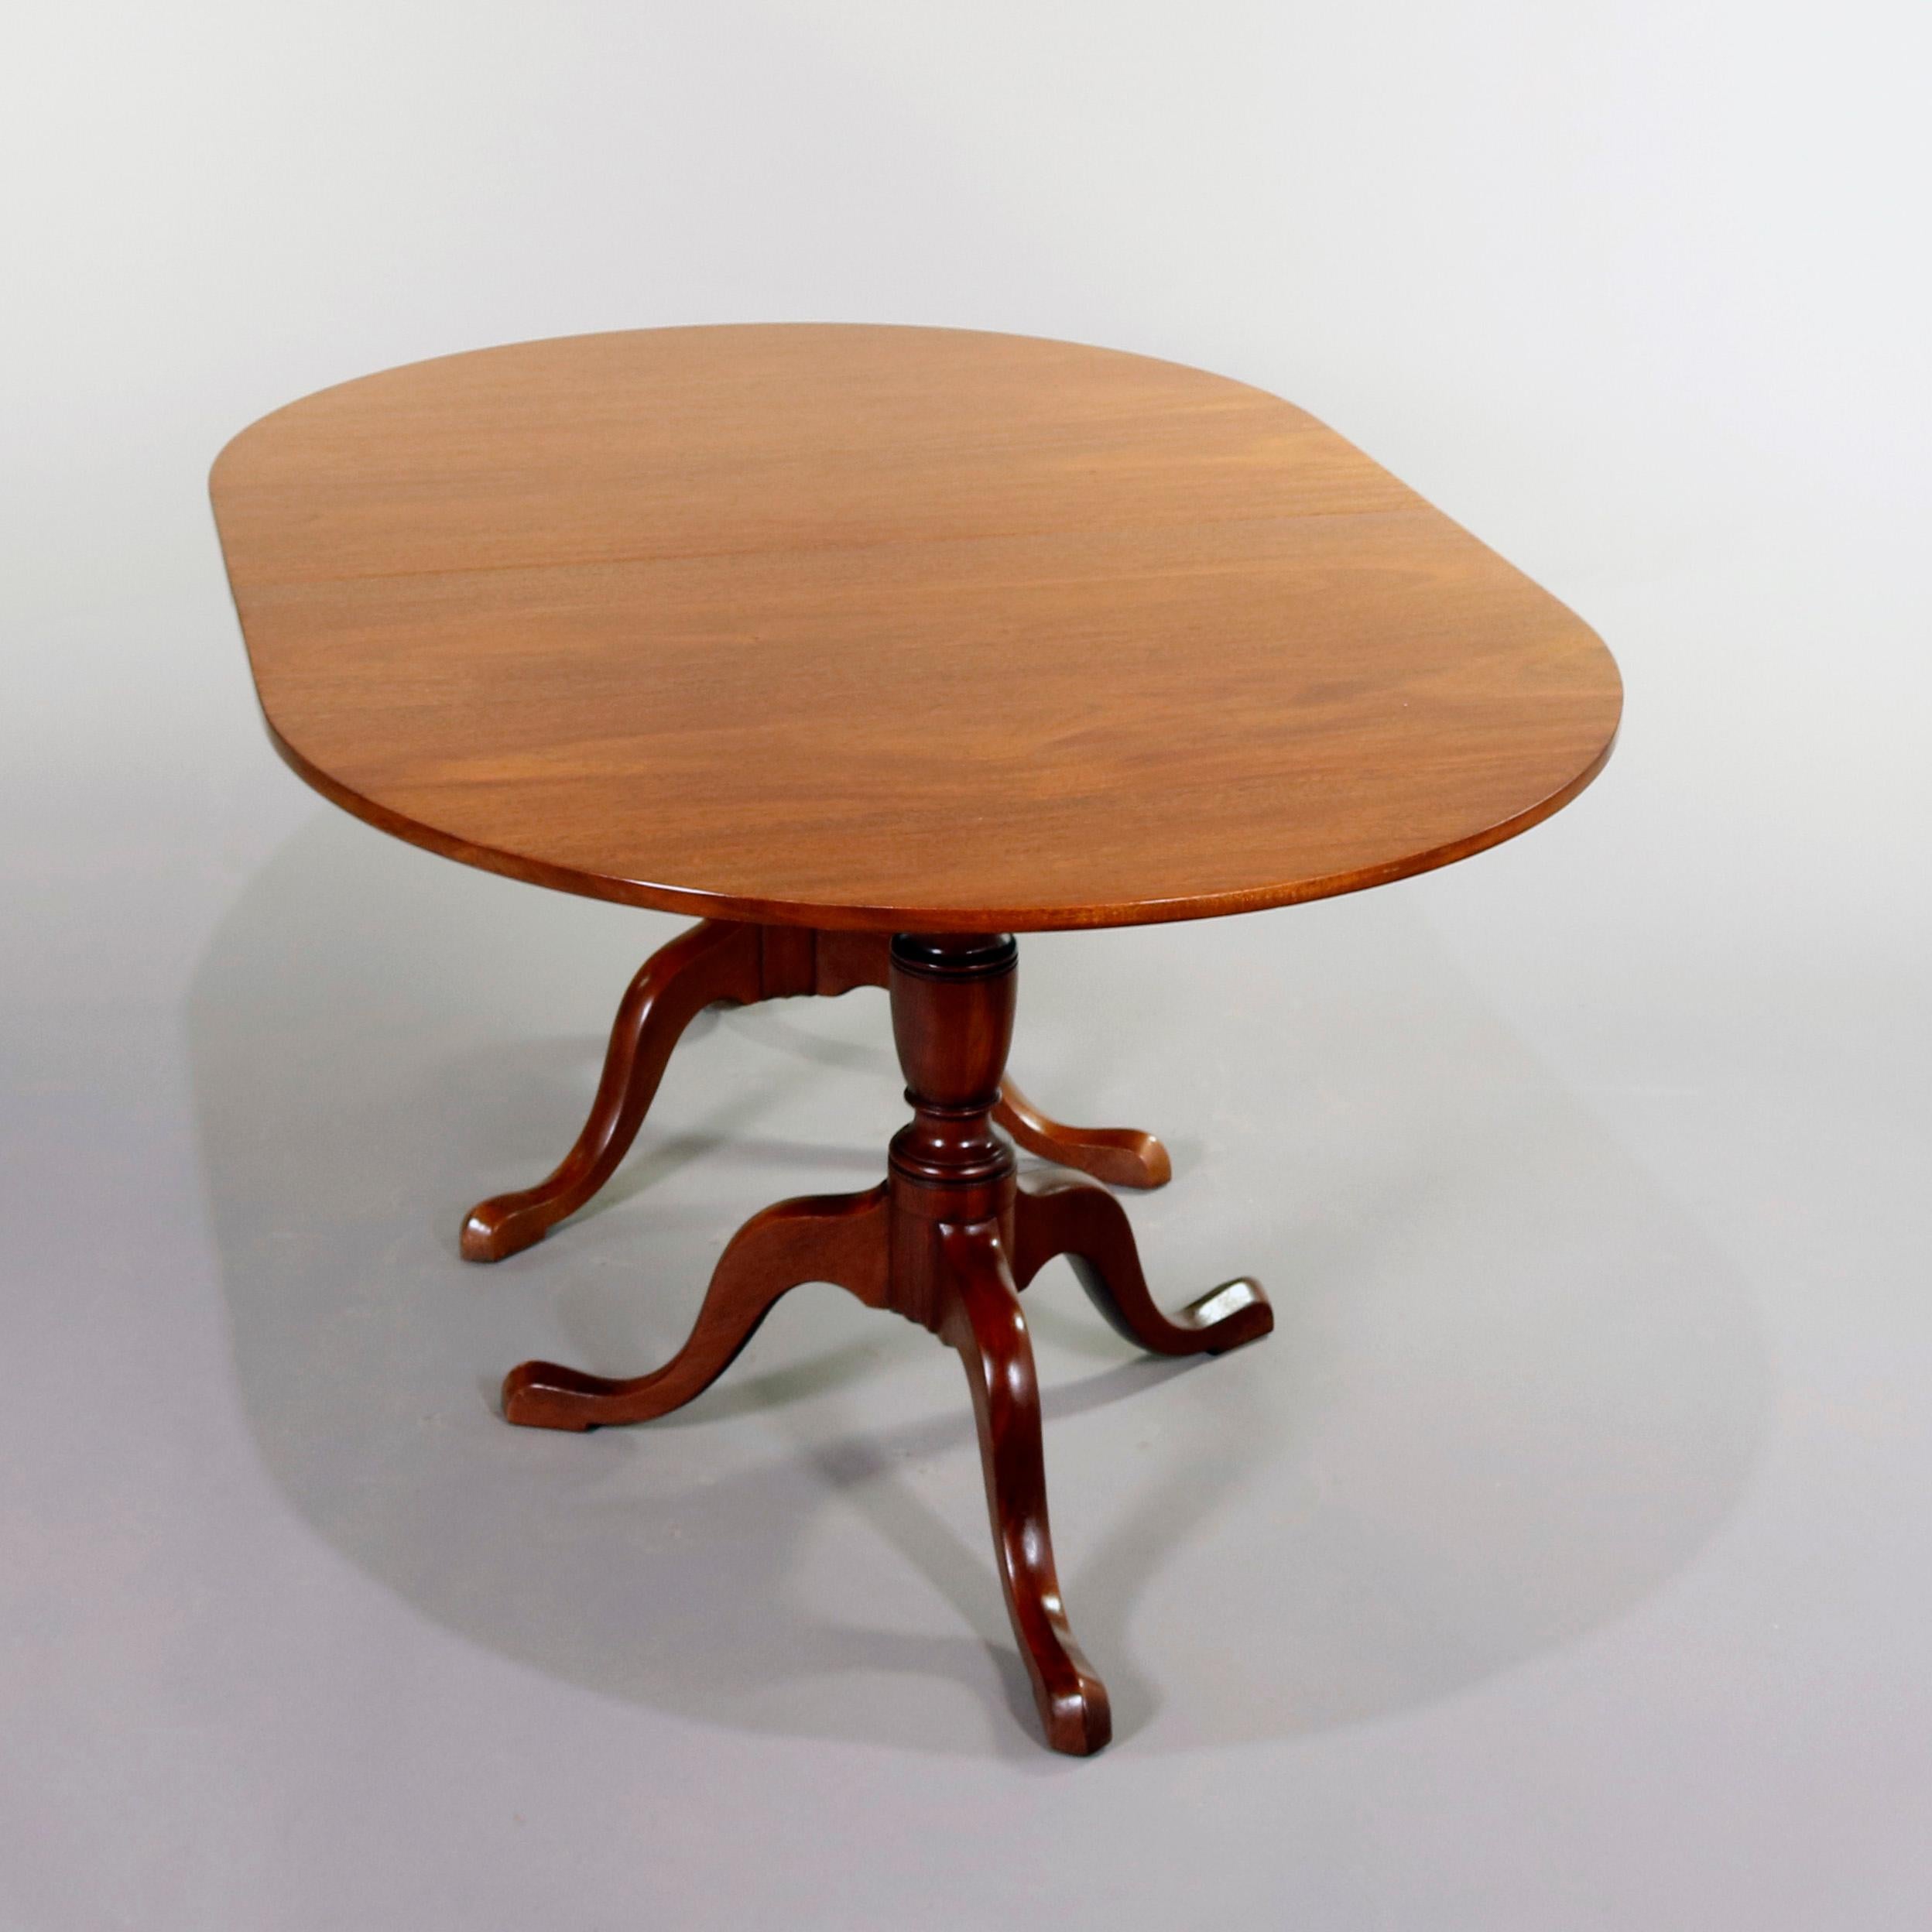 Baker School Queen Anne style dining table features mahogany construction with oval dining surface raised on double pedestal tripod bases having pad feet, without leaves, 20th century

Measures - 29.75